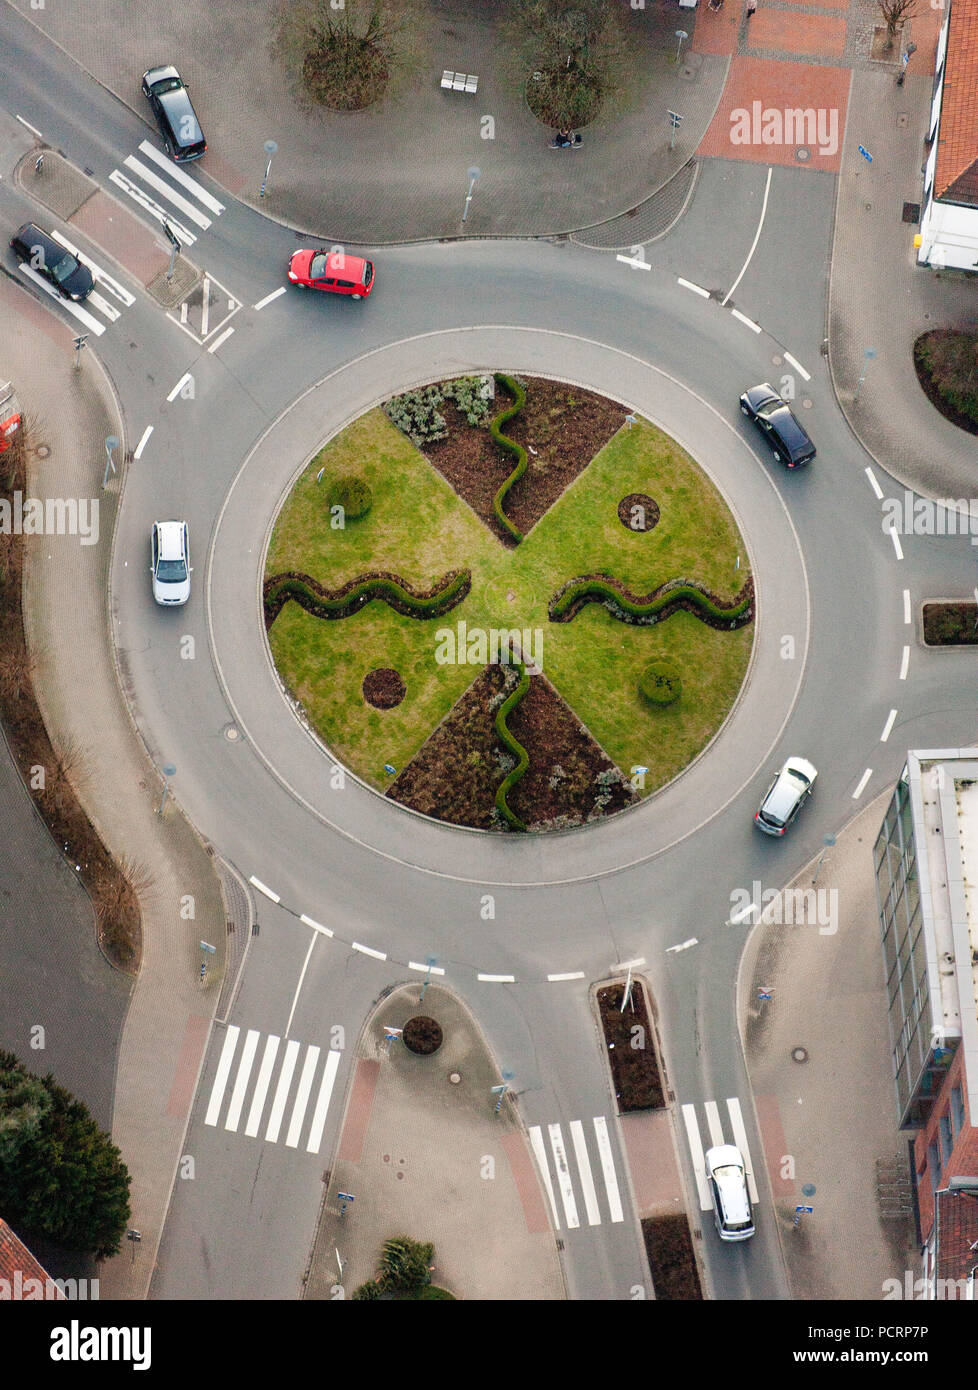 Aerial view, roundabout at the Volksbank Haltern, traffic island on the roundabout, Haltern am See, Ruhr area, North Rhine-Westphalia, Germany, Europe Stock Photo